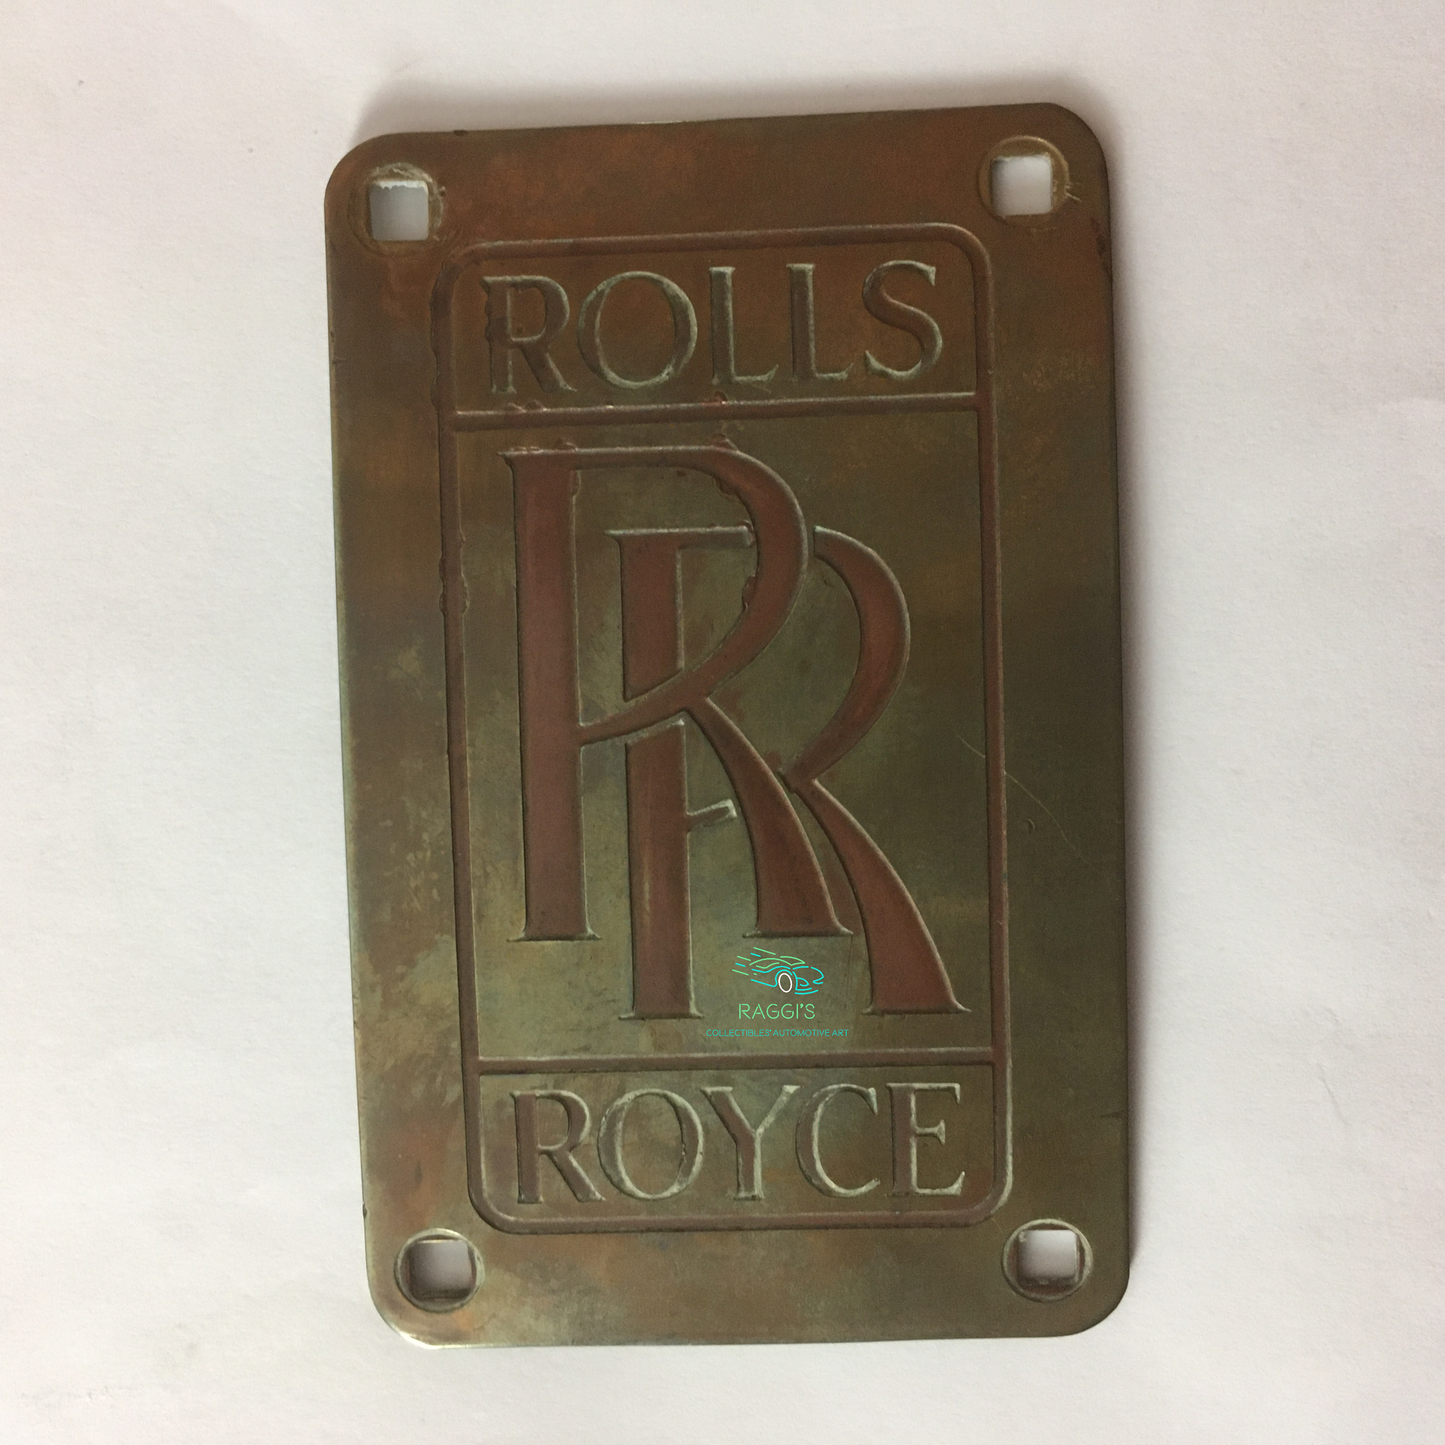 Rolls-Royce, Original Brass Emblem with Red Letters, Extremely Rare